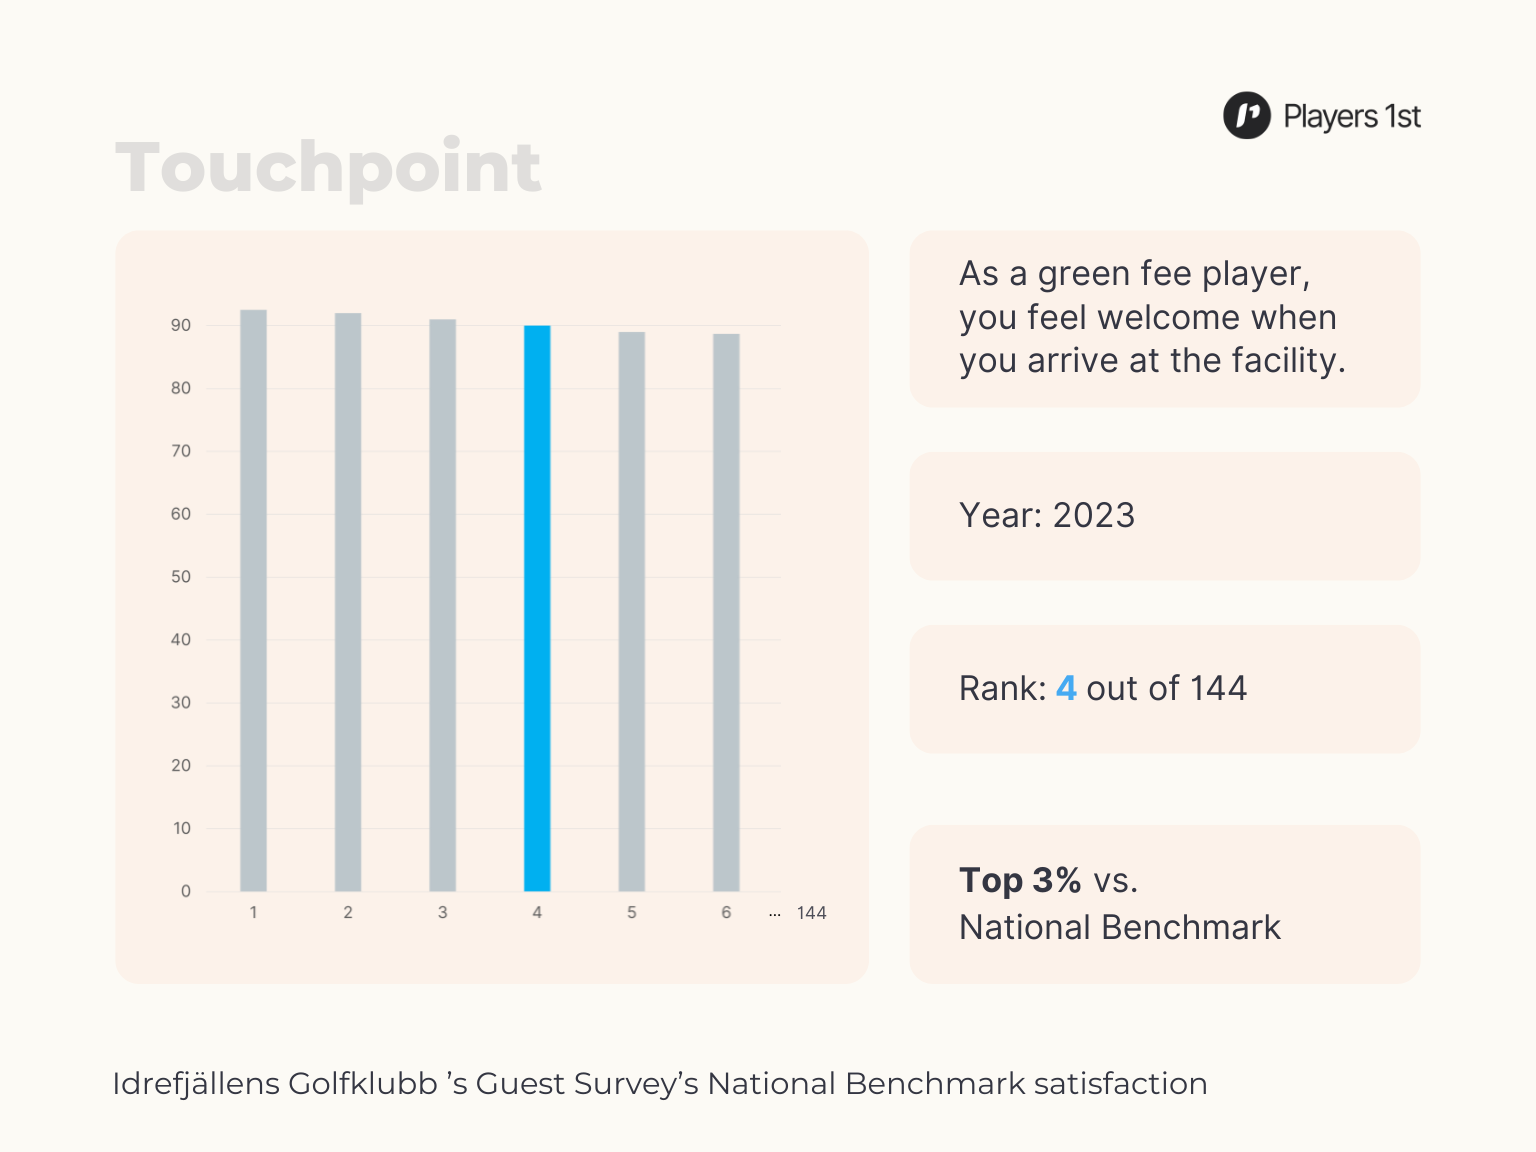 Figure 2: The ranking of Idrefjällens Golfklubb benchmarked against other Players 1st clubs in Sweden. Touchpoint: As a green fee player, you feel welcome when you arrive at the facility. Source: Players 1st